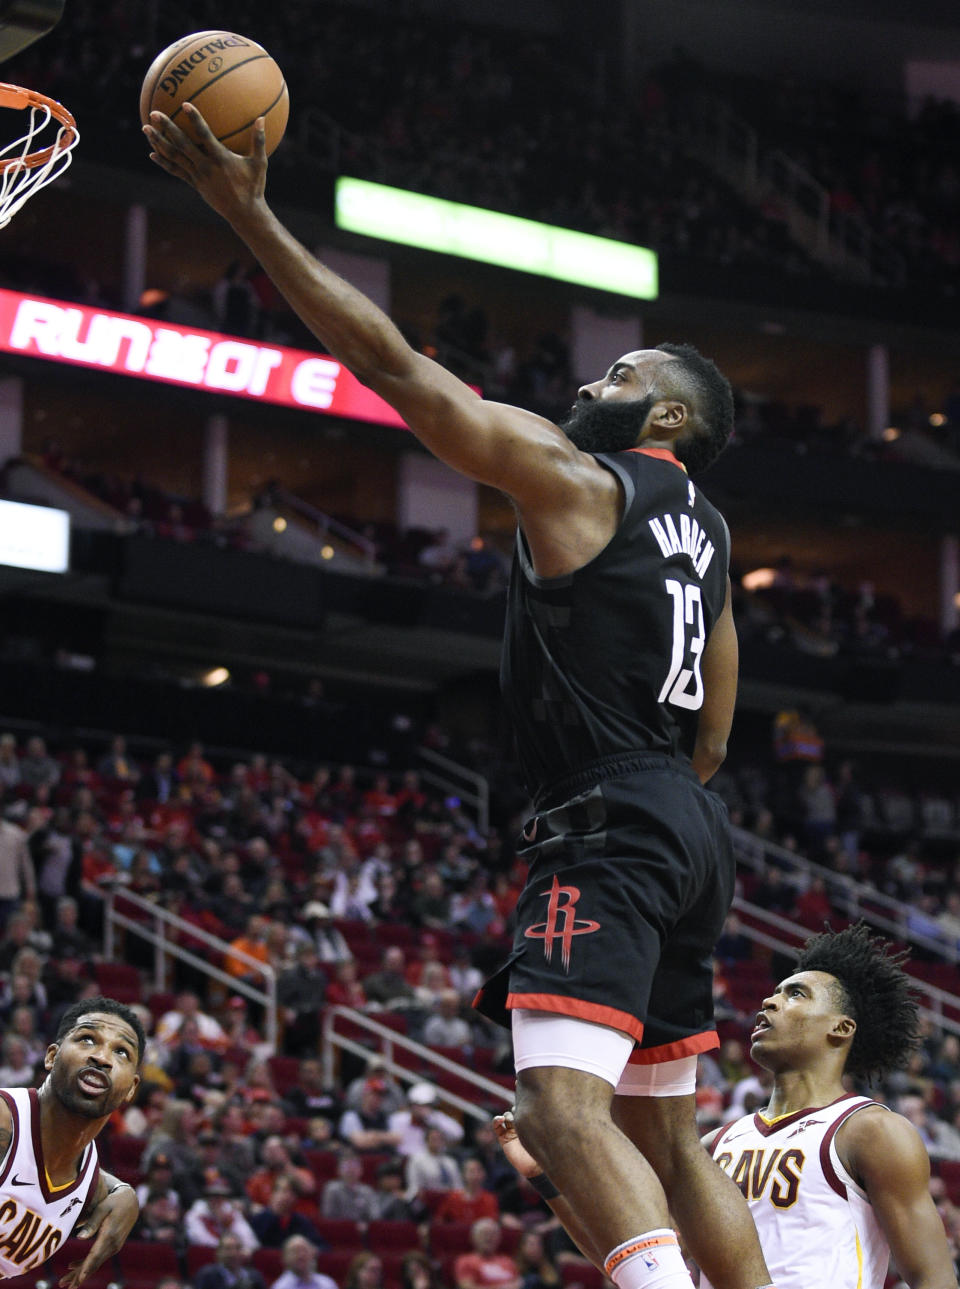 Houston Rockets guard James Harden (13) drives to the basket past Cleveland Cavaliers guard Collin Sexton, right, during the first half of an NBA basketball game Friday, Jan. 11, 2019, in Houston. (AP Photo/Eric Christian Smith)